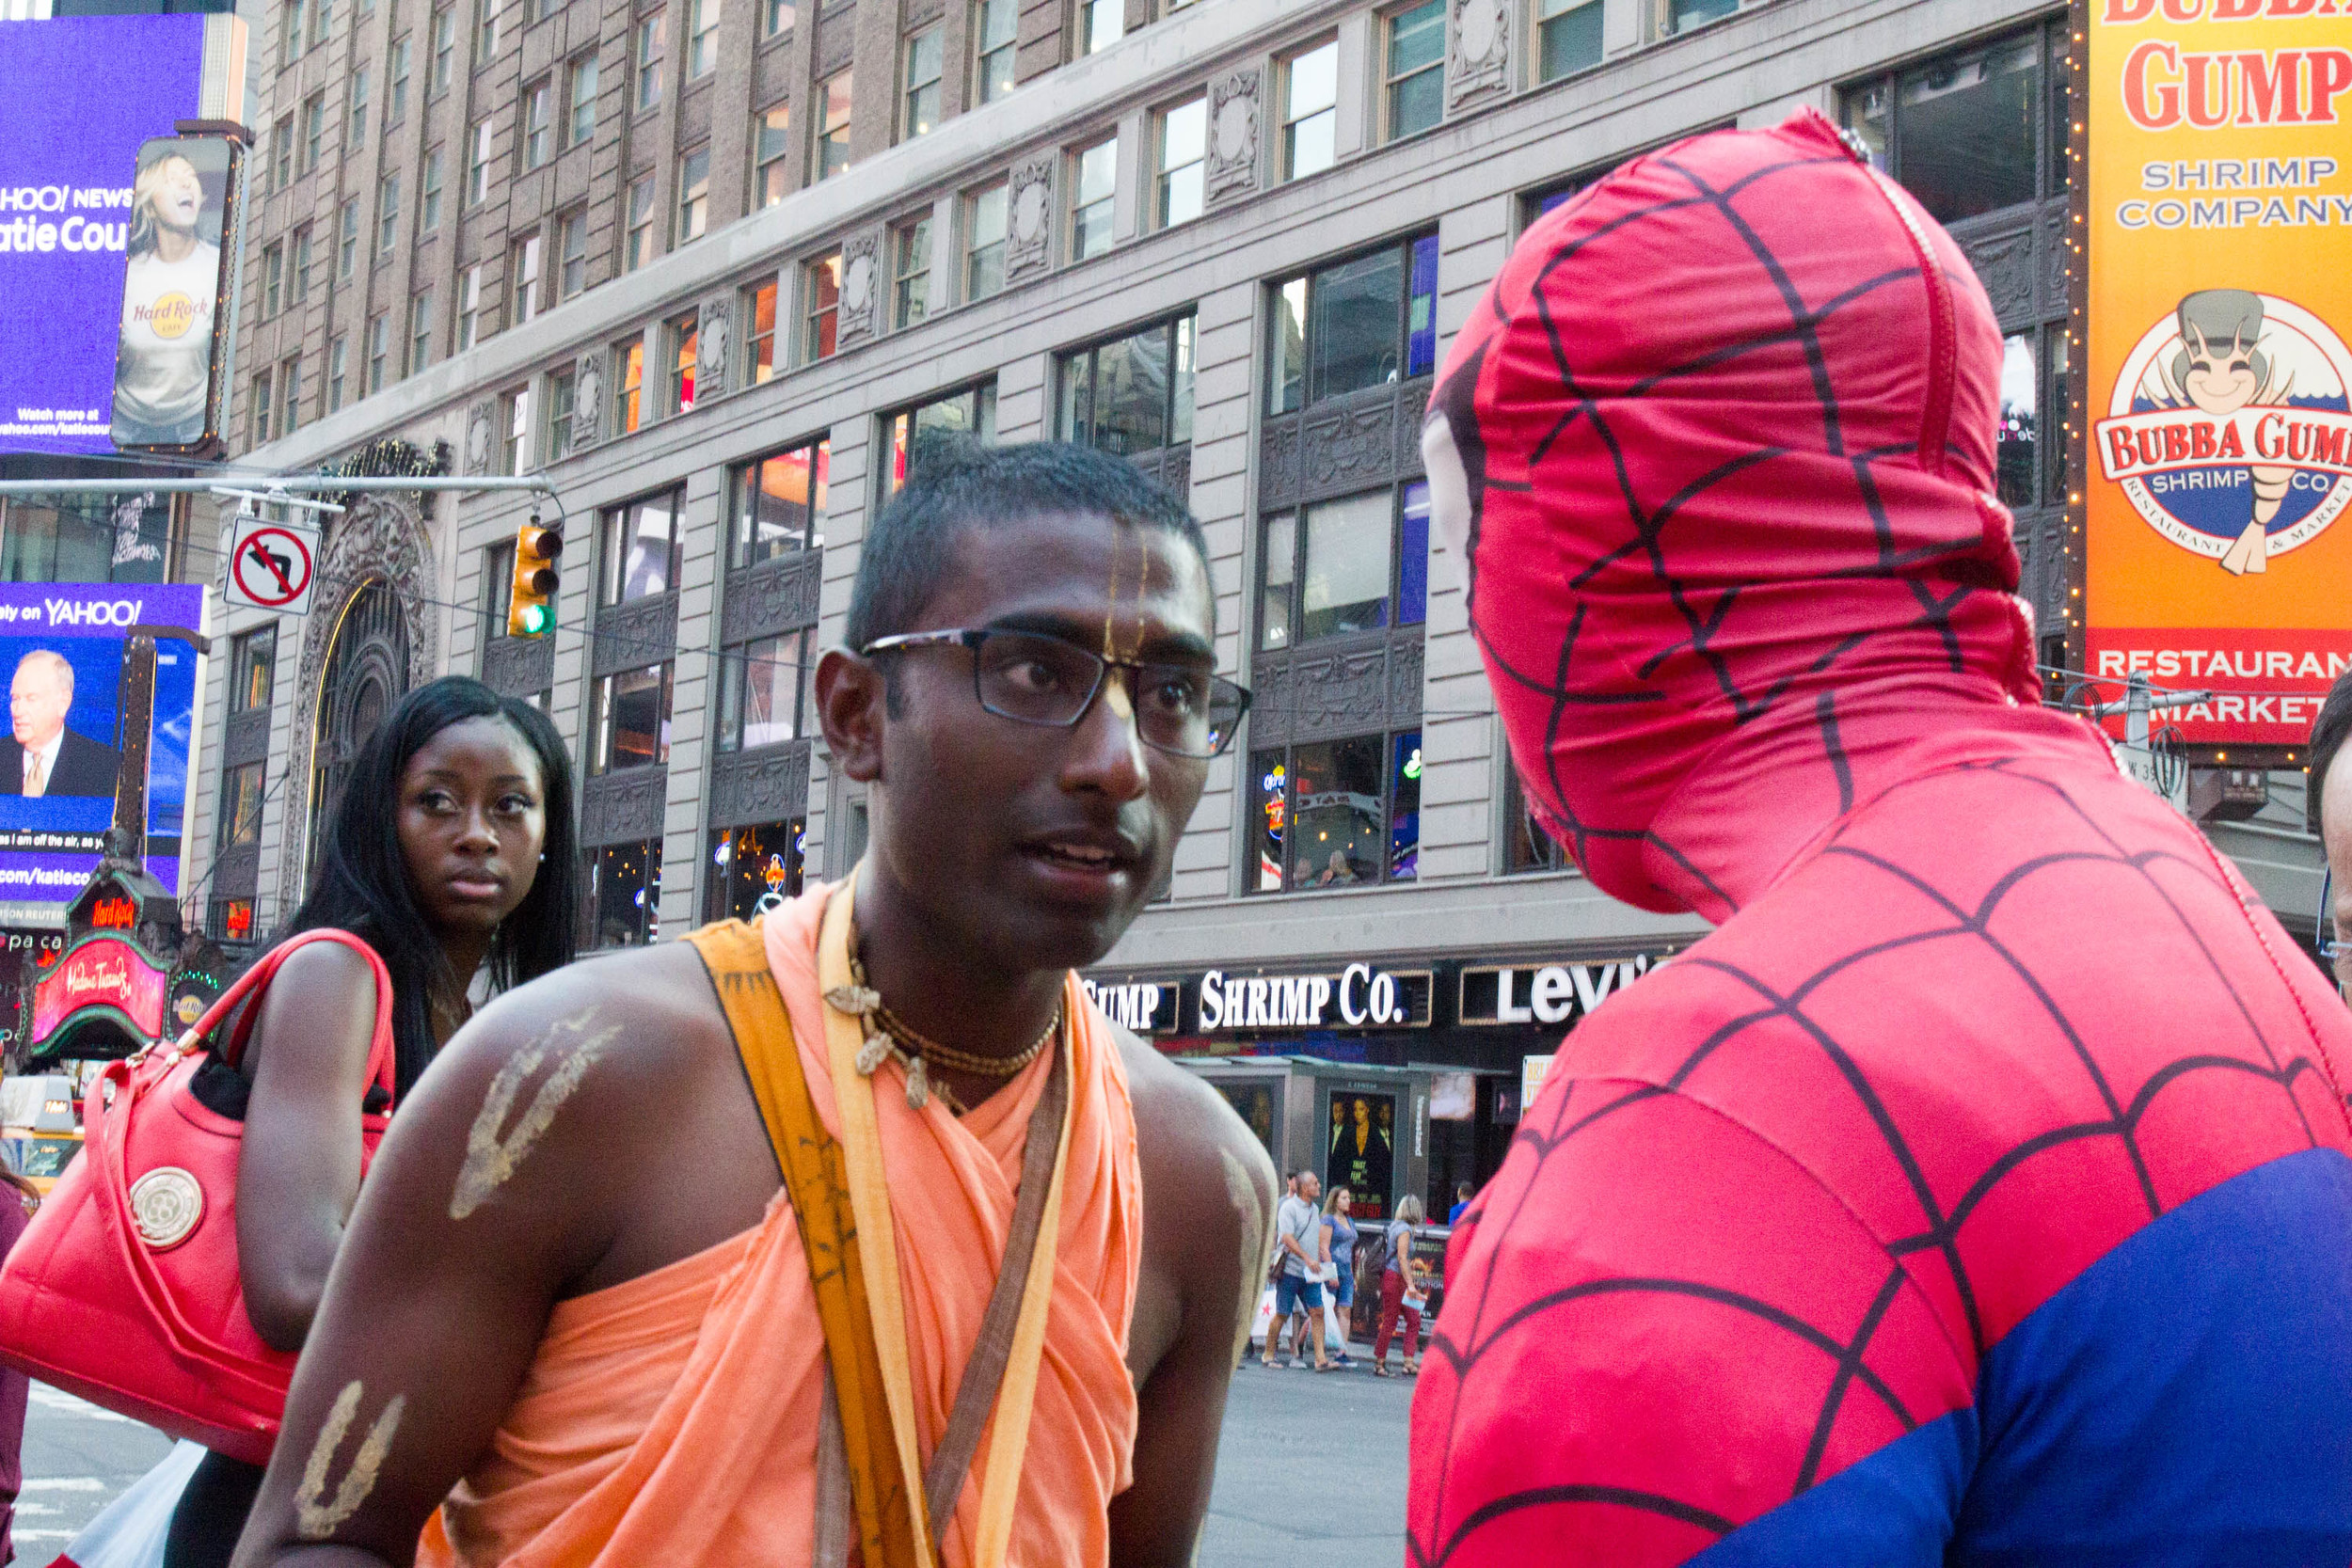  Nihal speaks to a man dressed as spider man while chanting in Times square 